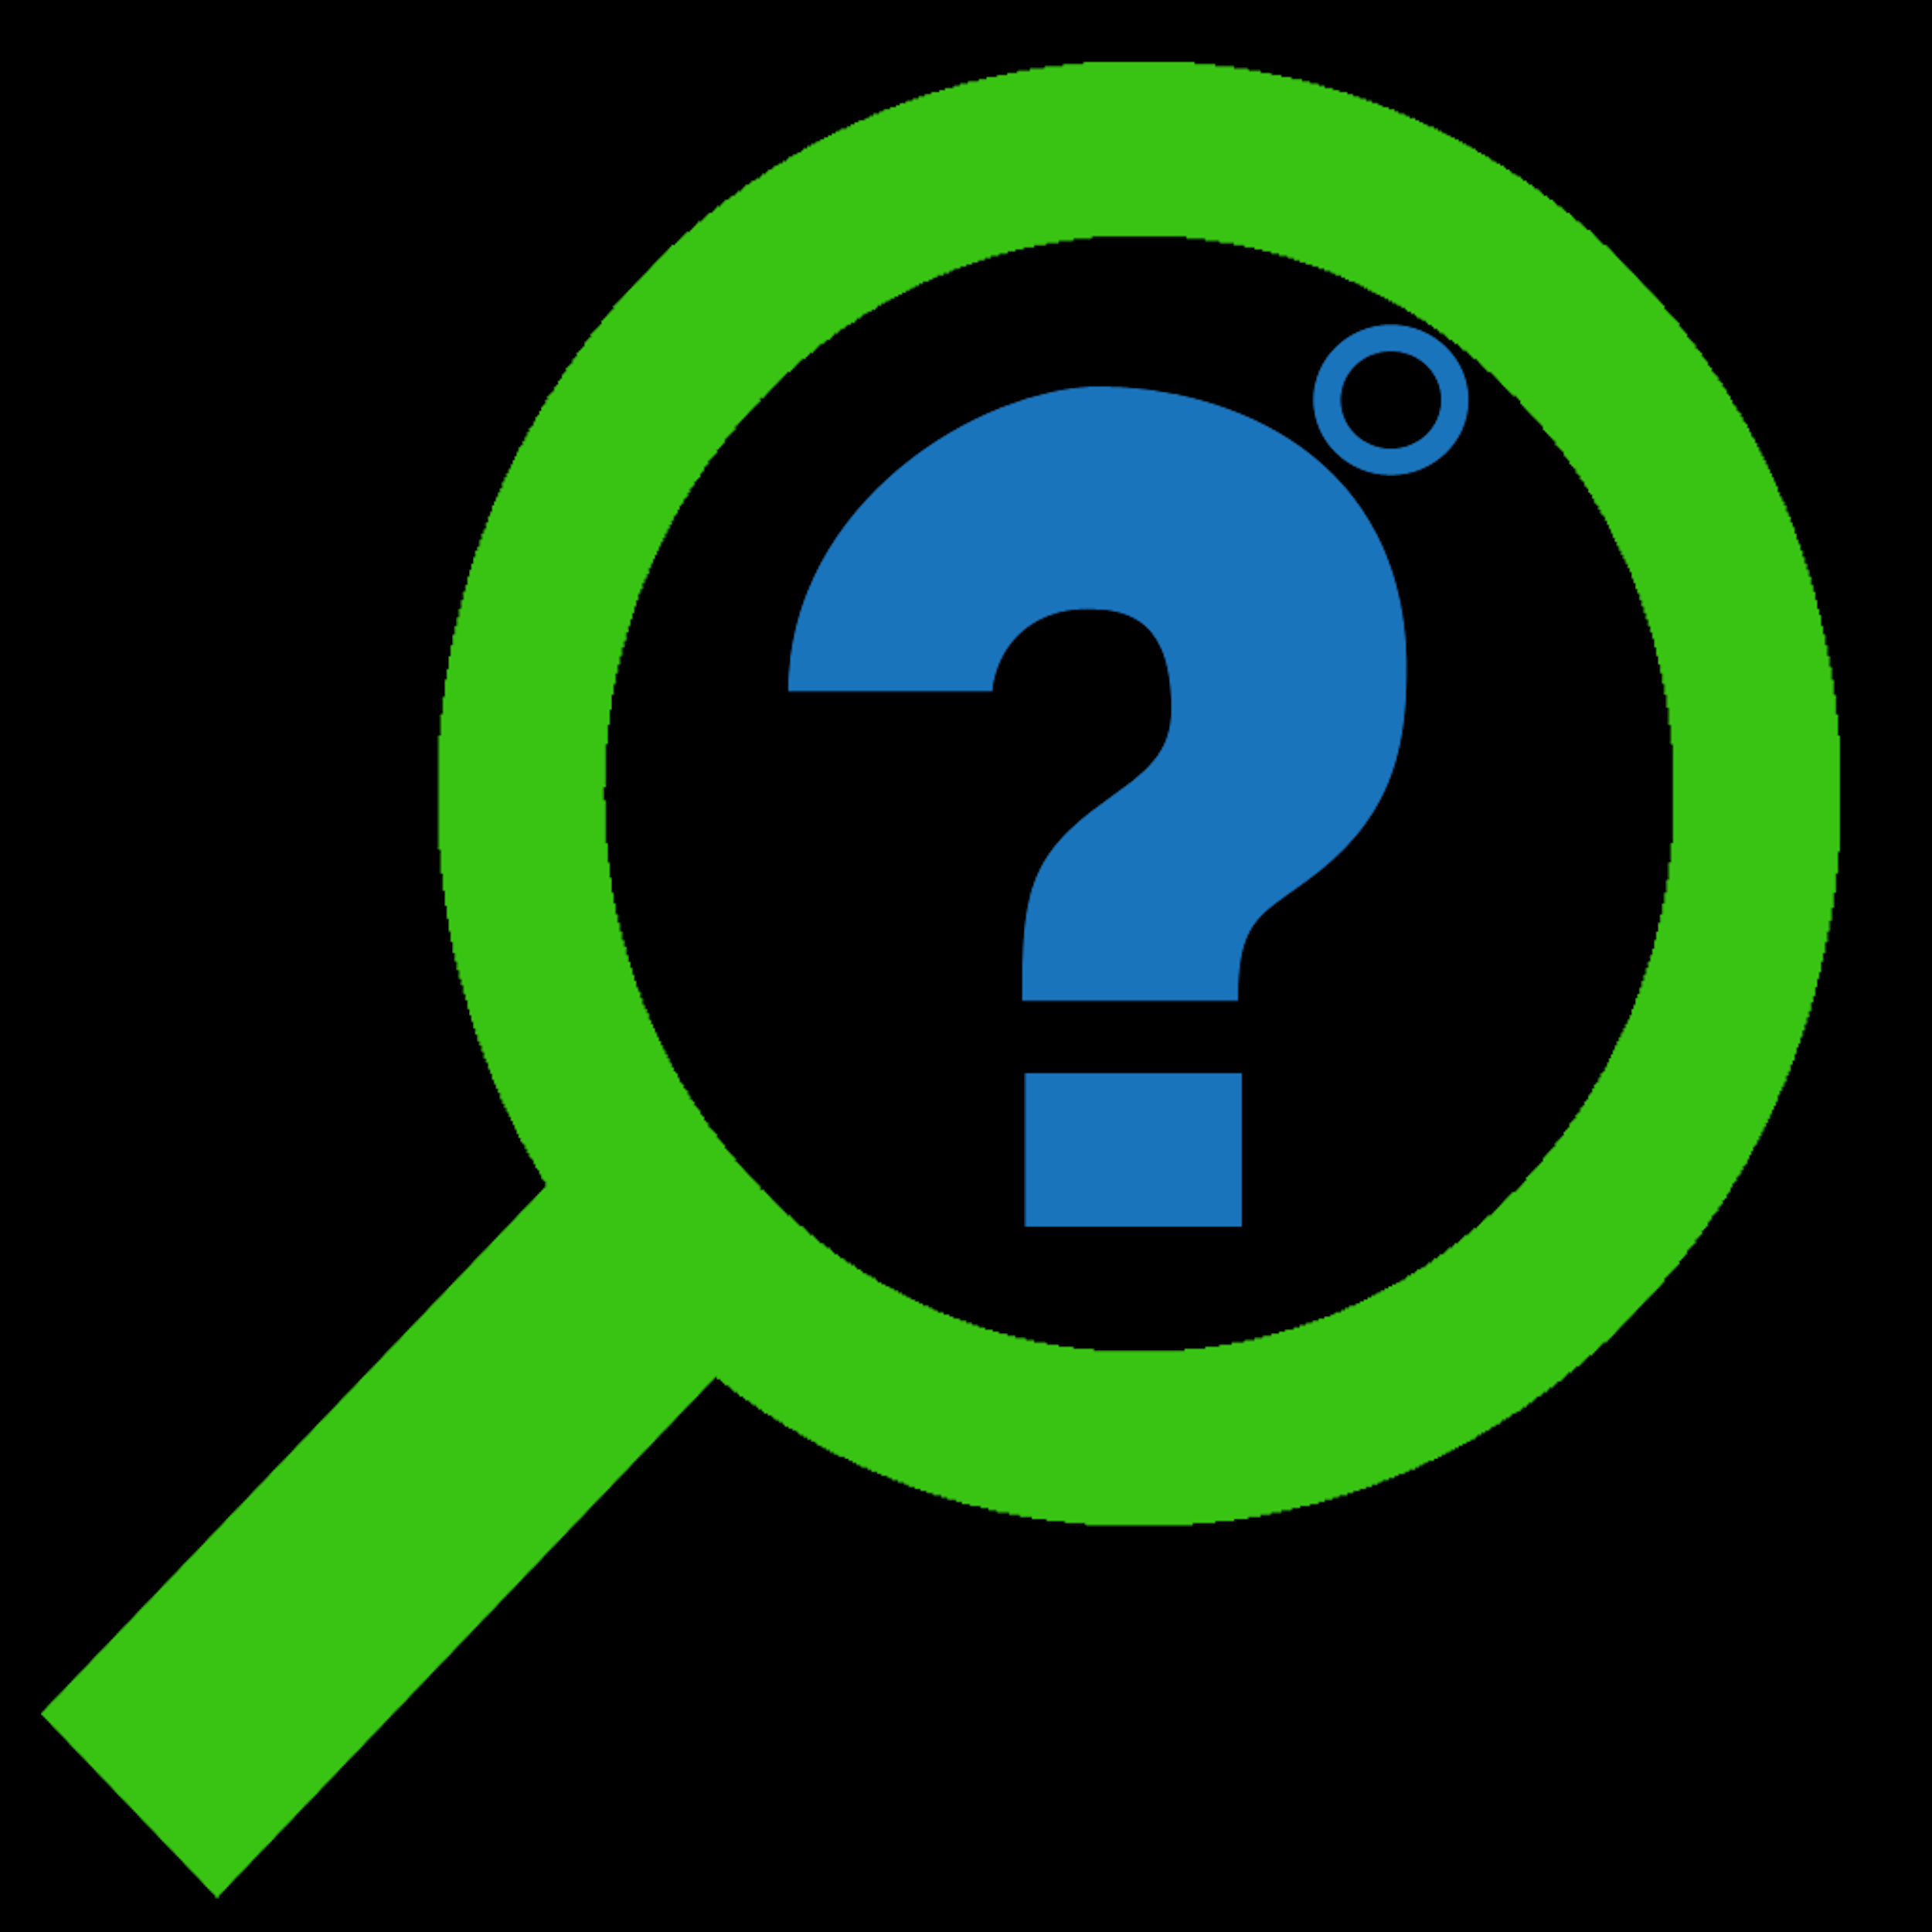 Urbanbyte Fixture Finder Logo blue green on black background with a questions mark inside a magnifiying glass with a degree symbol